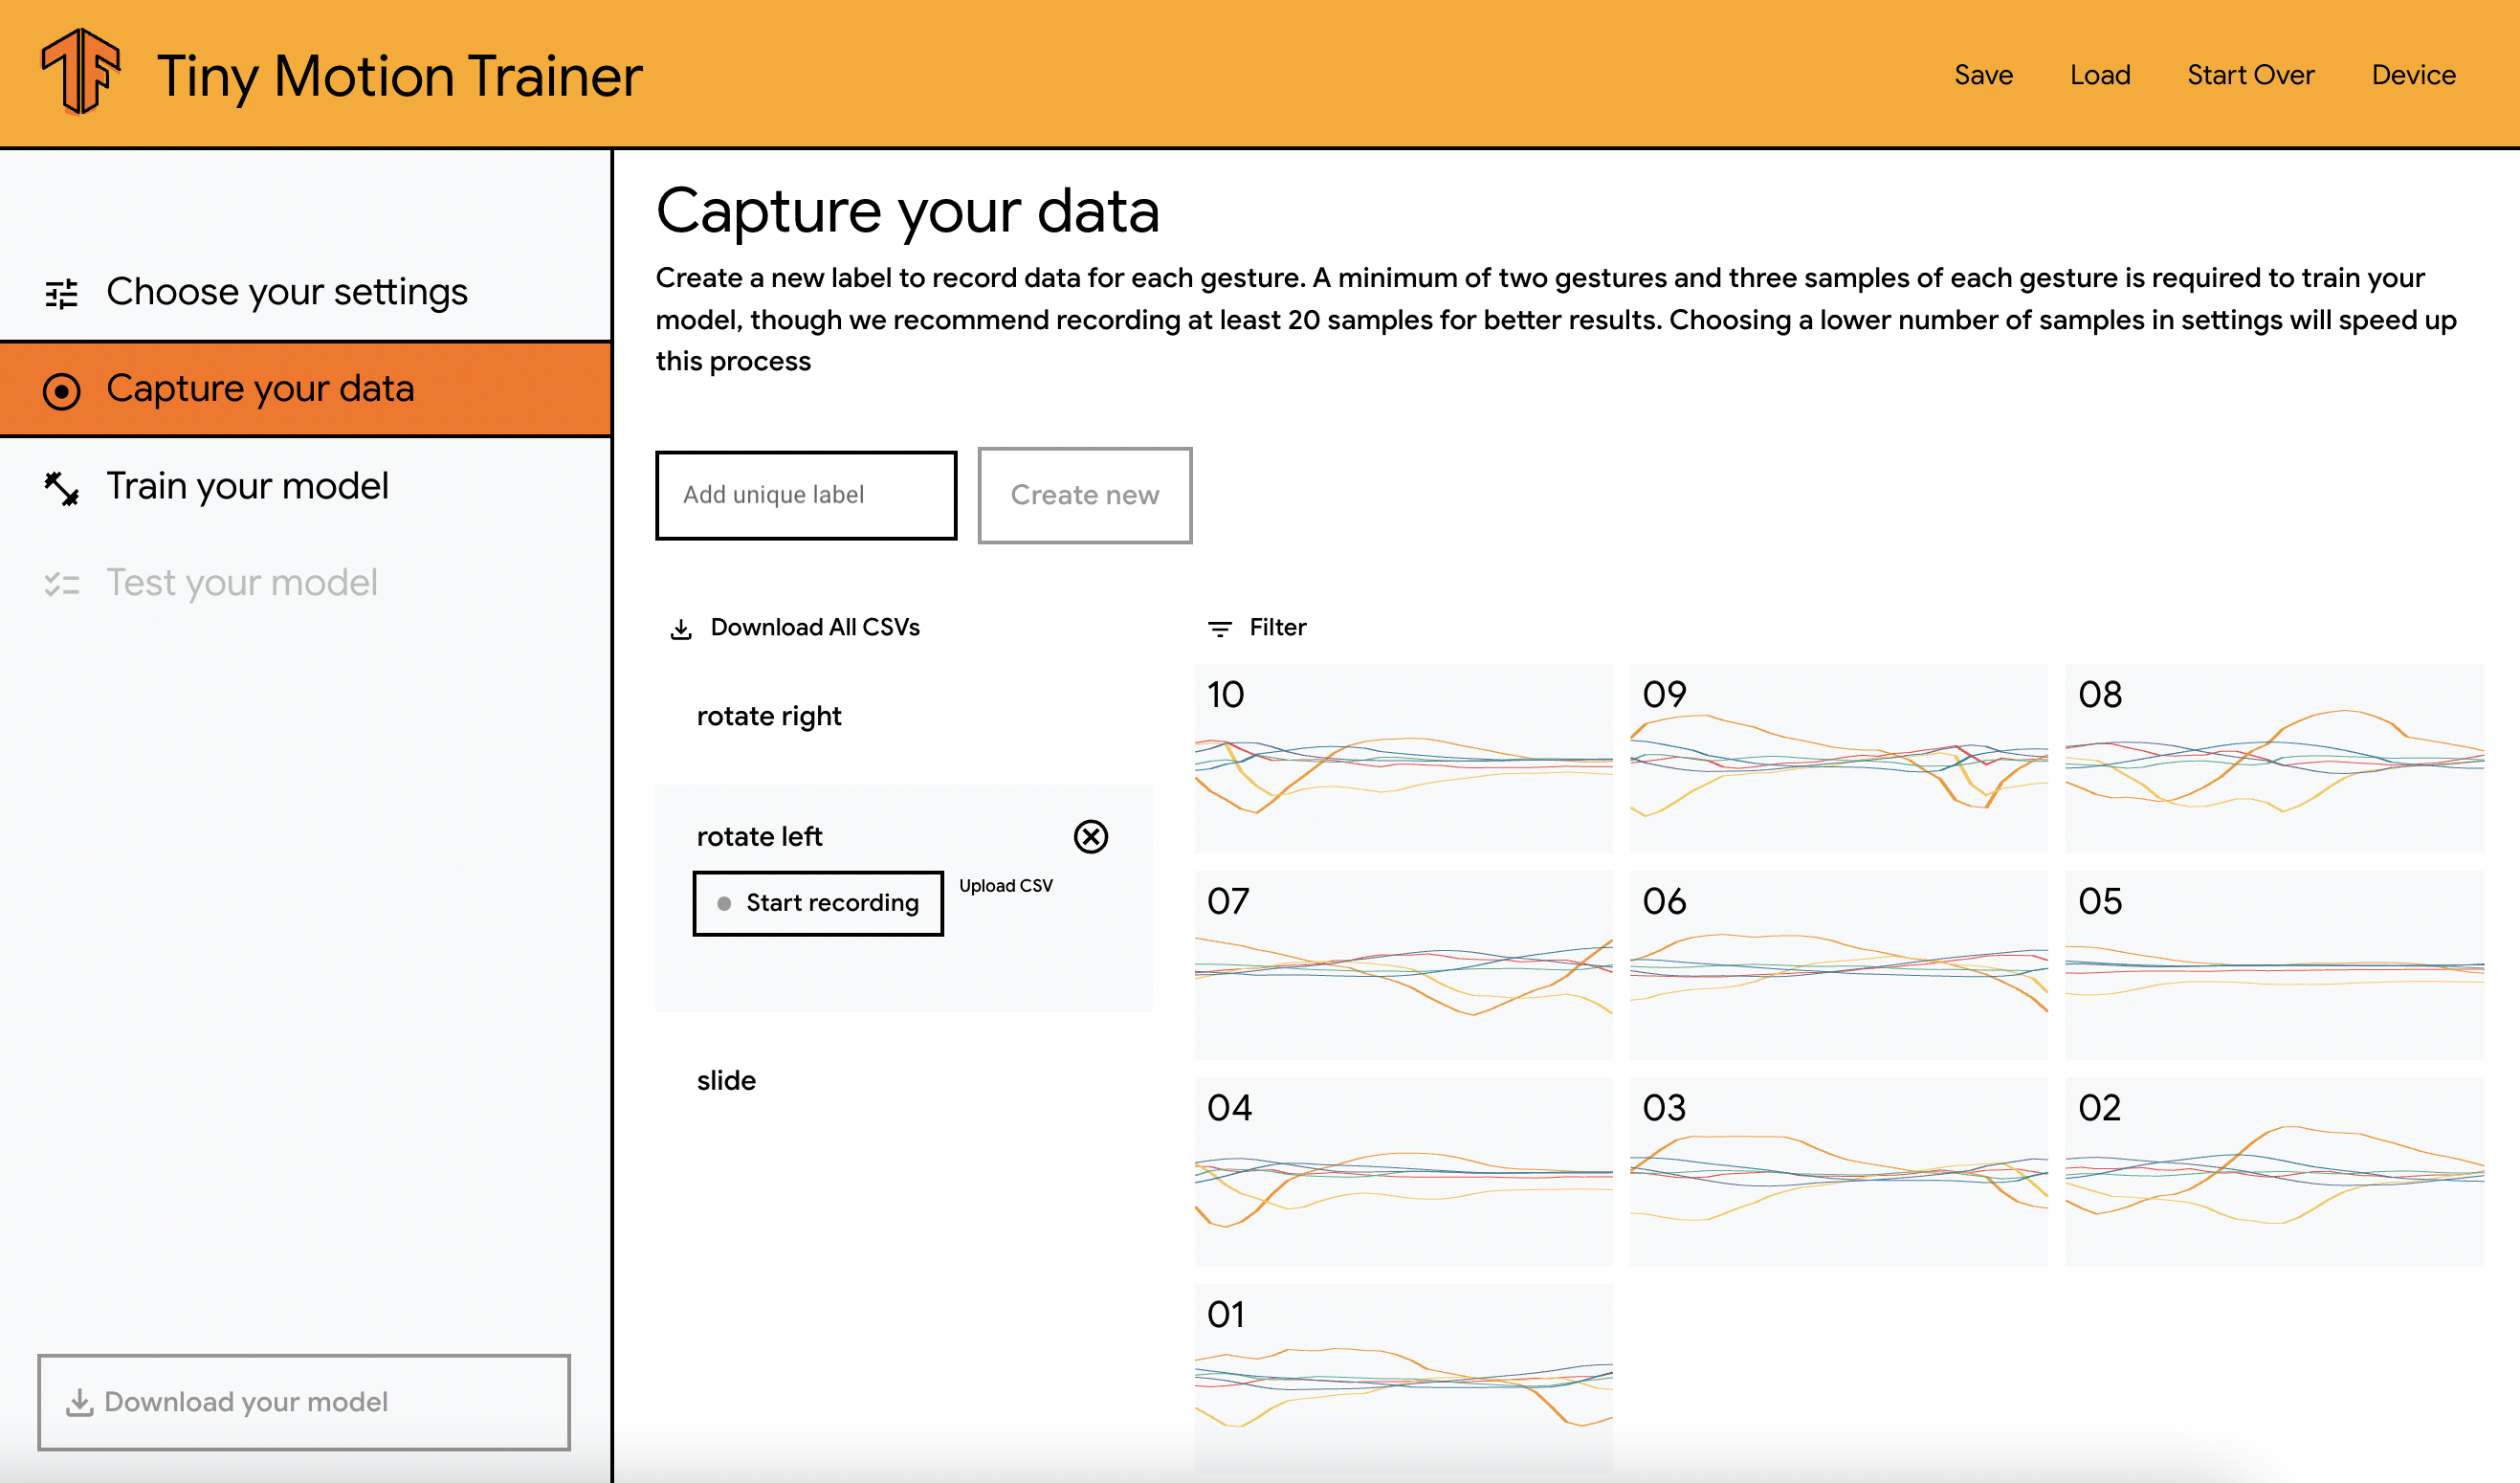 screenshot of the Tiny motion trainer UI showing the motion data visualizations